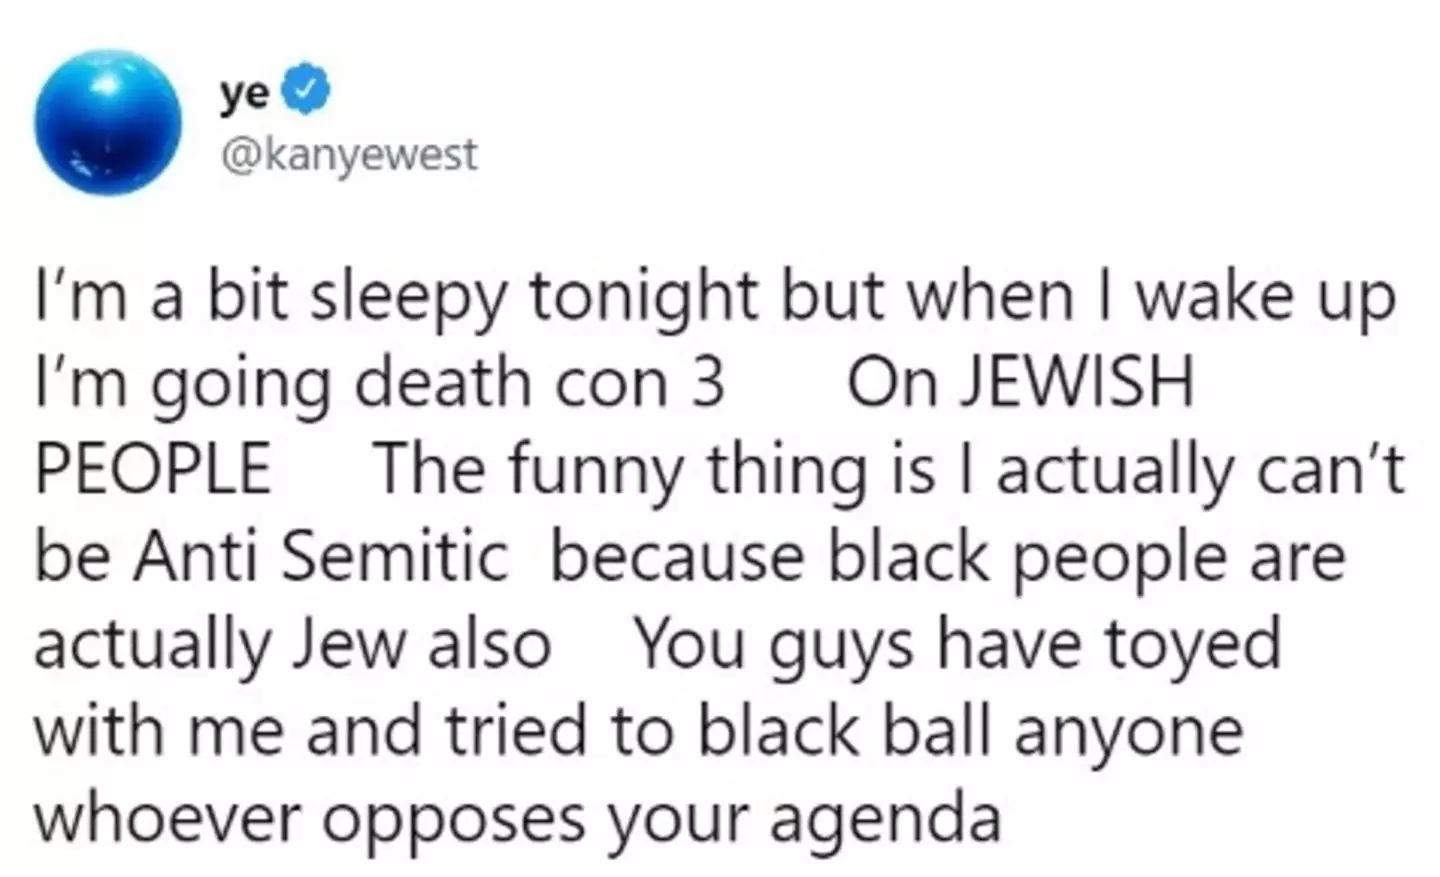 Ye was banned from Twitter after this tweet.